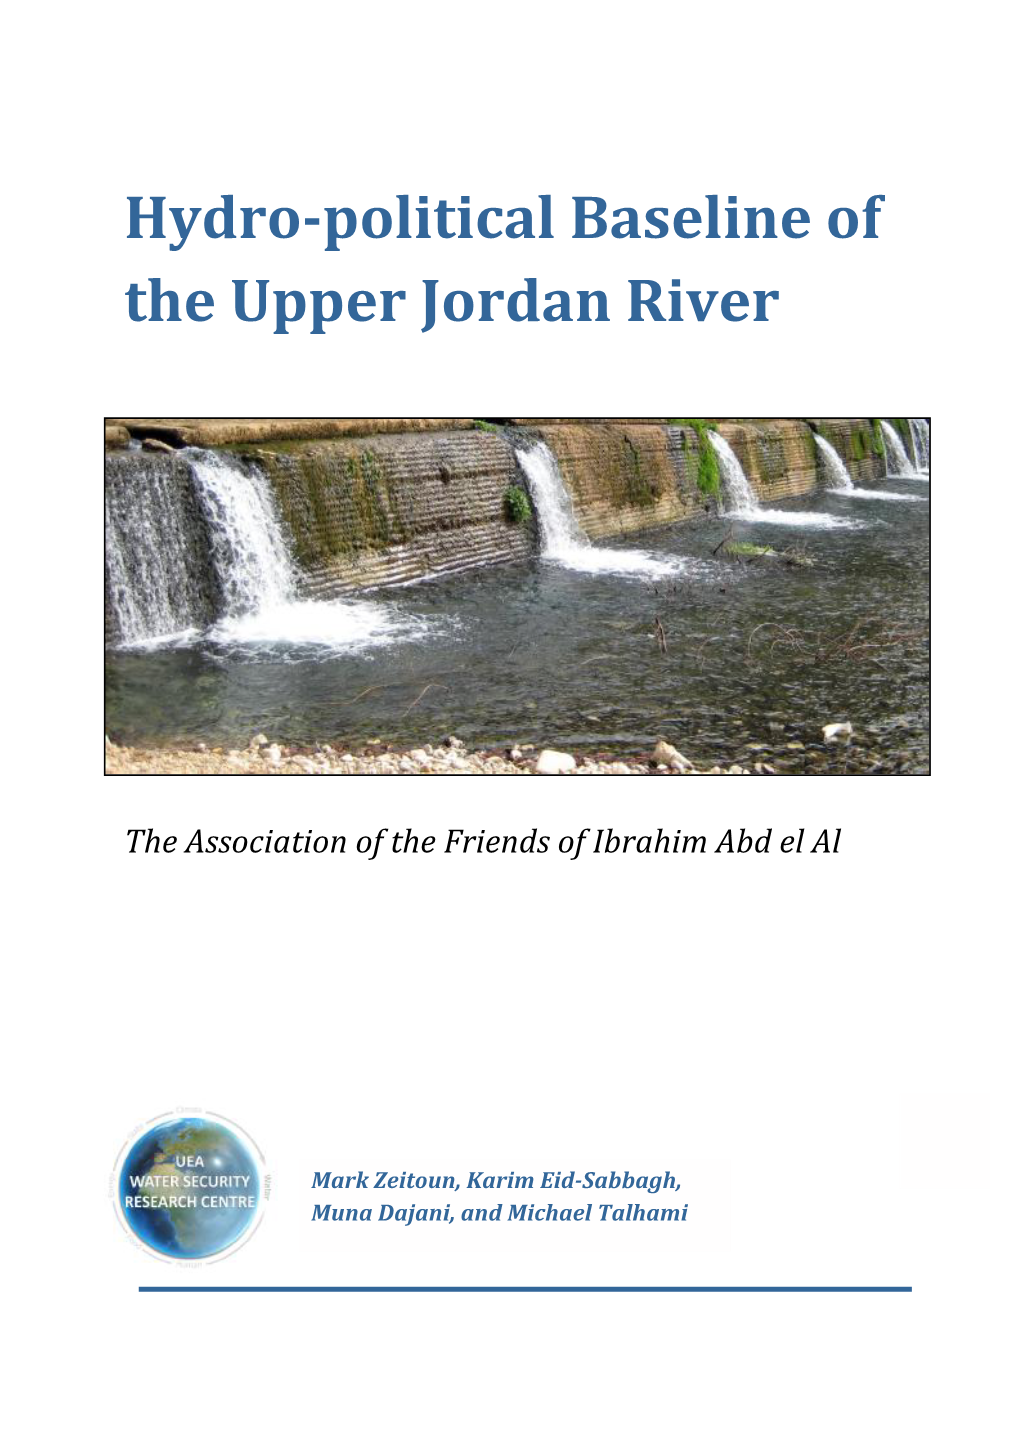 The Hydropolitical Baseline of the Upper Jordan River • Executive Summary